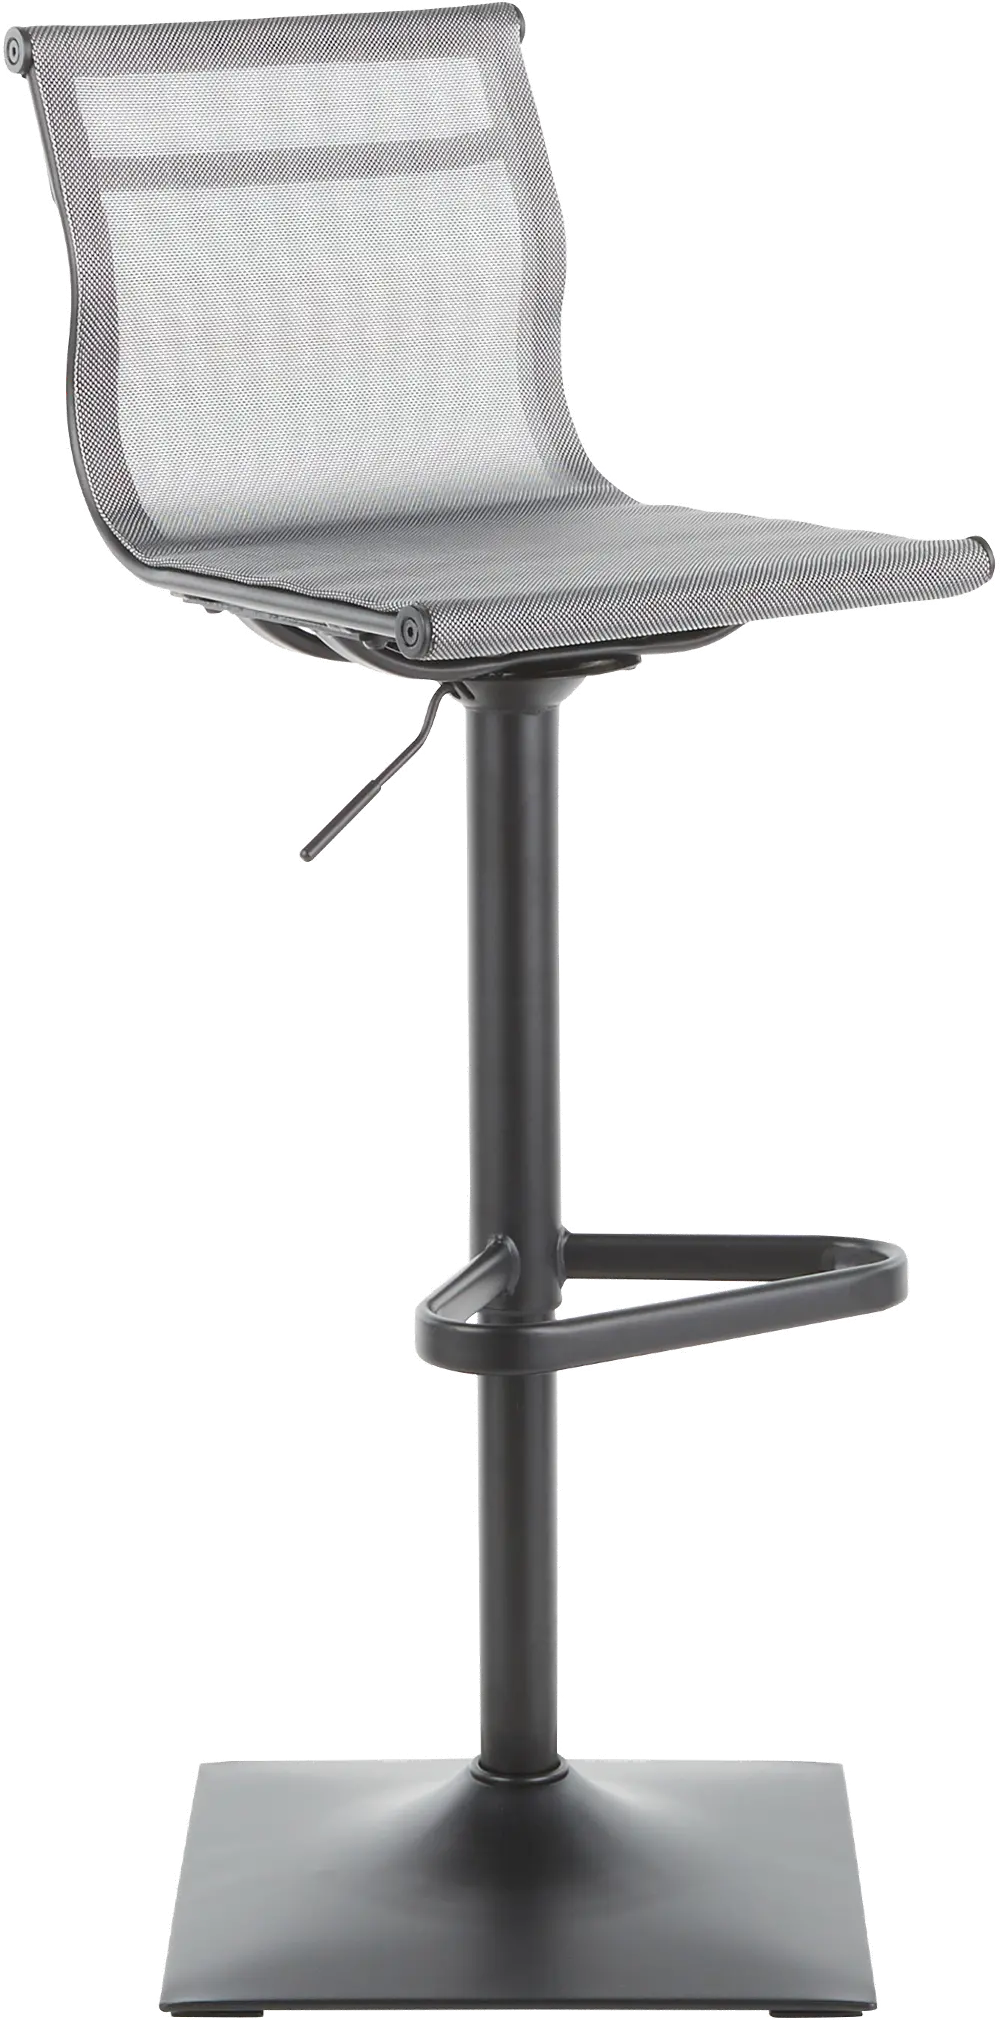 BS-MIRAGE BKSV Contemporary Gray and Black Adjustable Bar Stool - Mirage-1